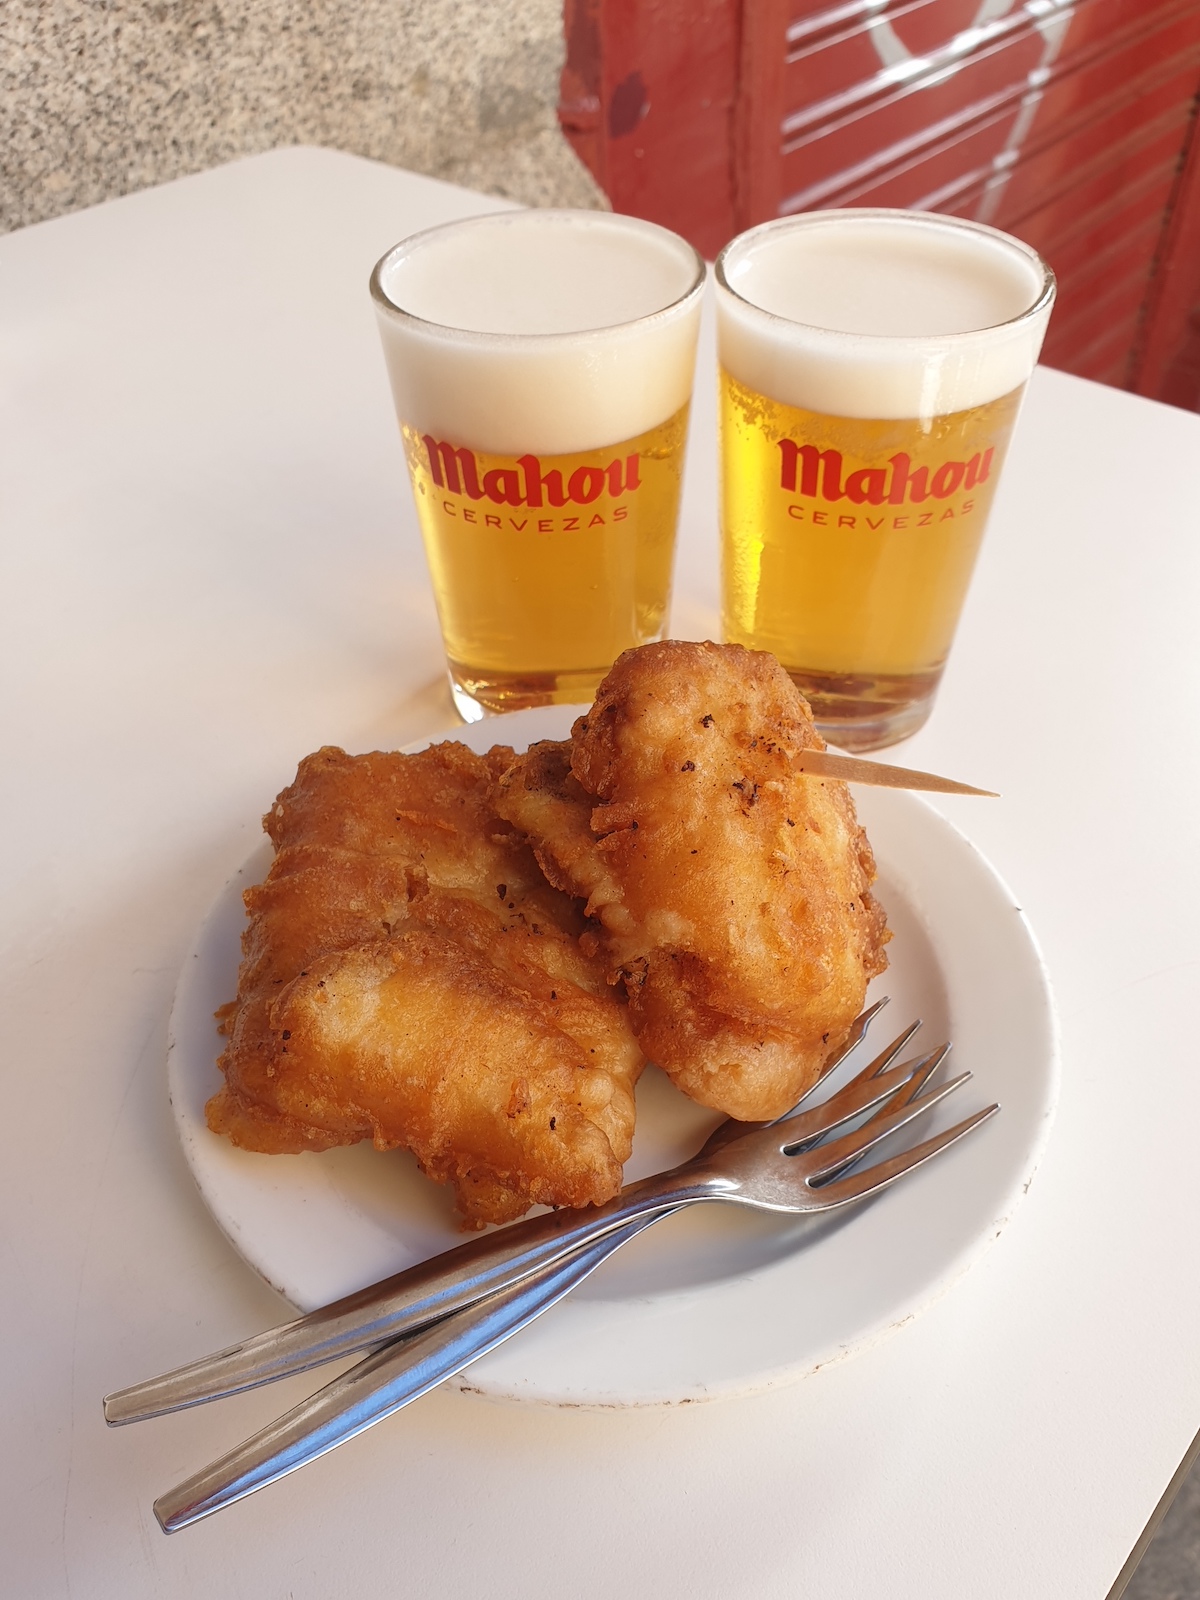 Pieces of fried codfish on a white plate in front of two small glasses of beer.